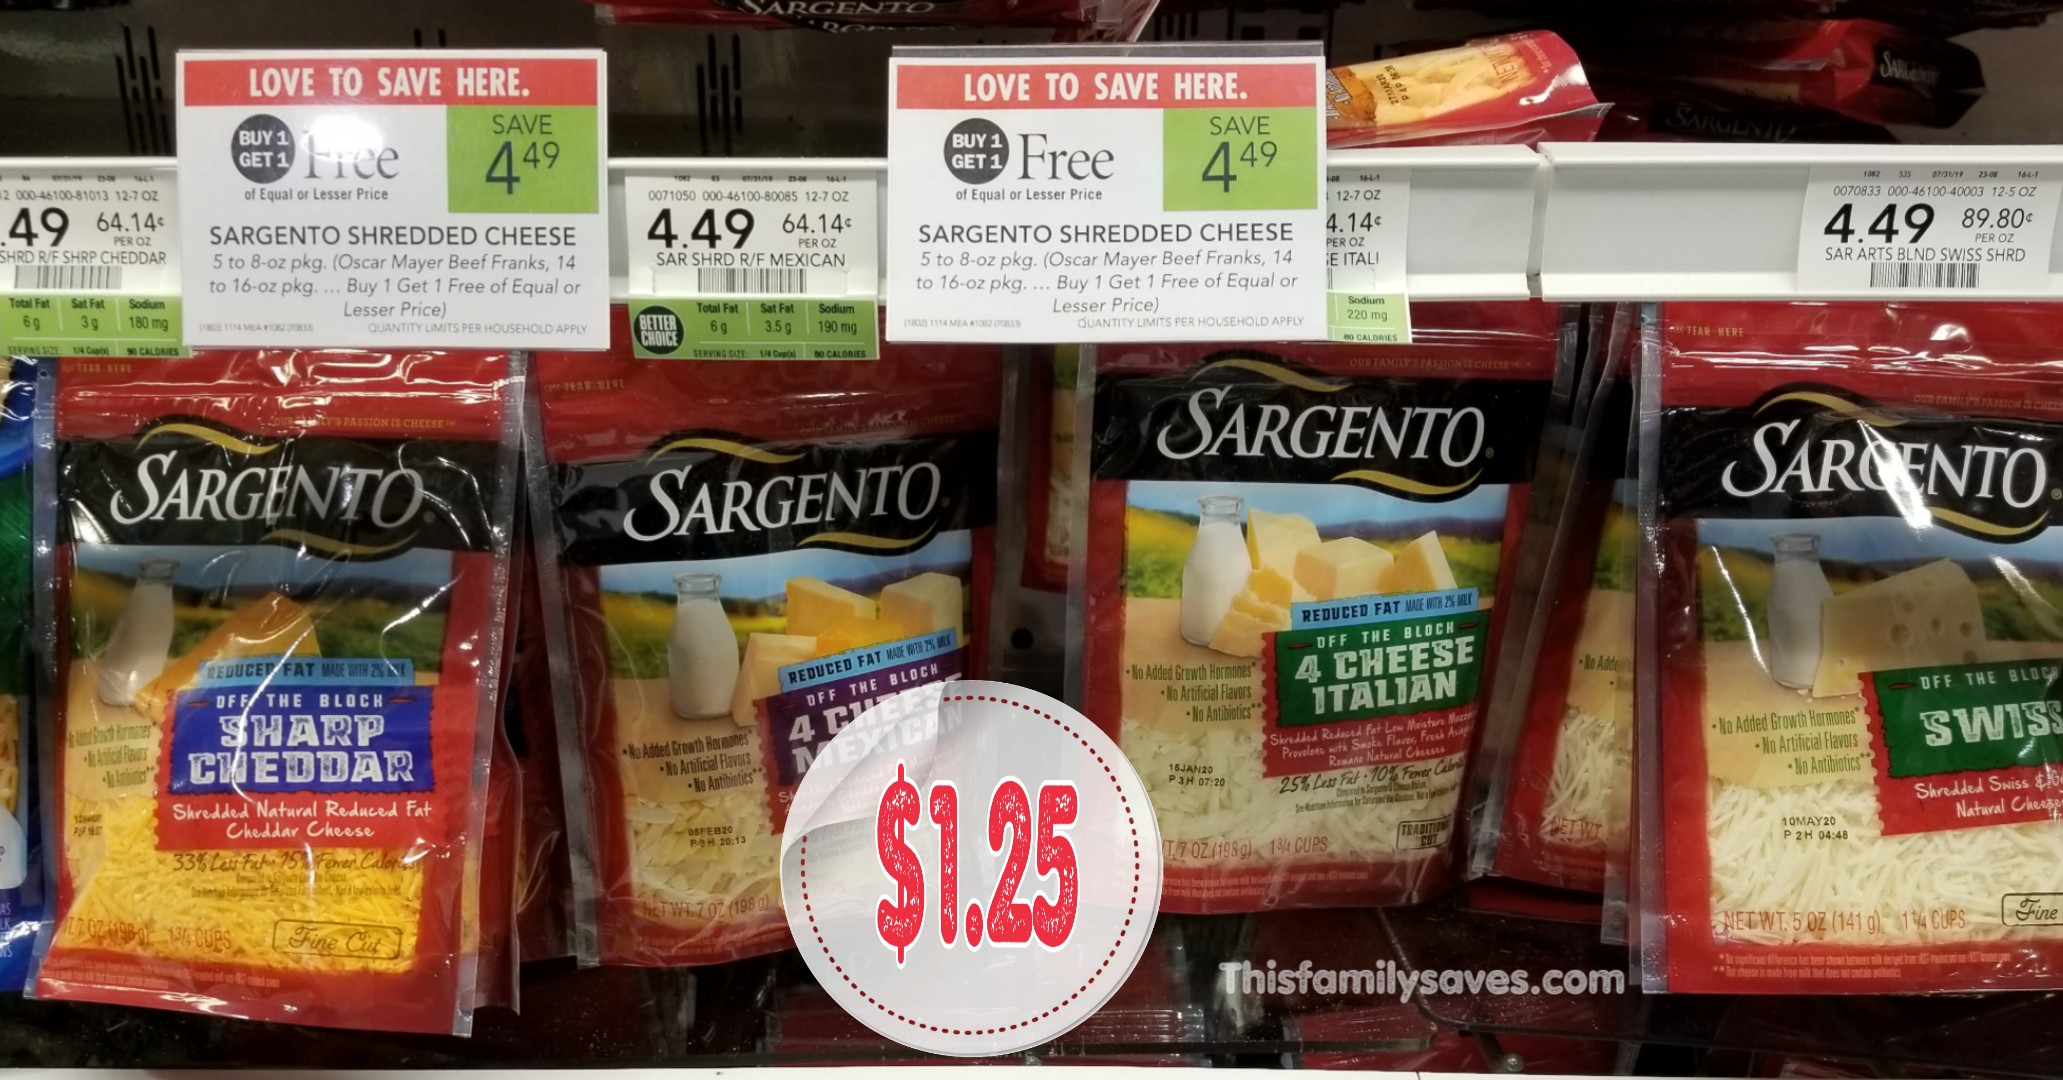 Sargento Shredded Cheese – Only $1.25 each